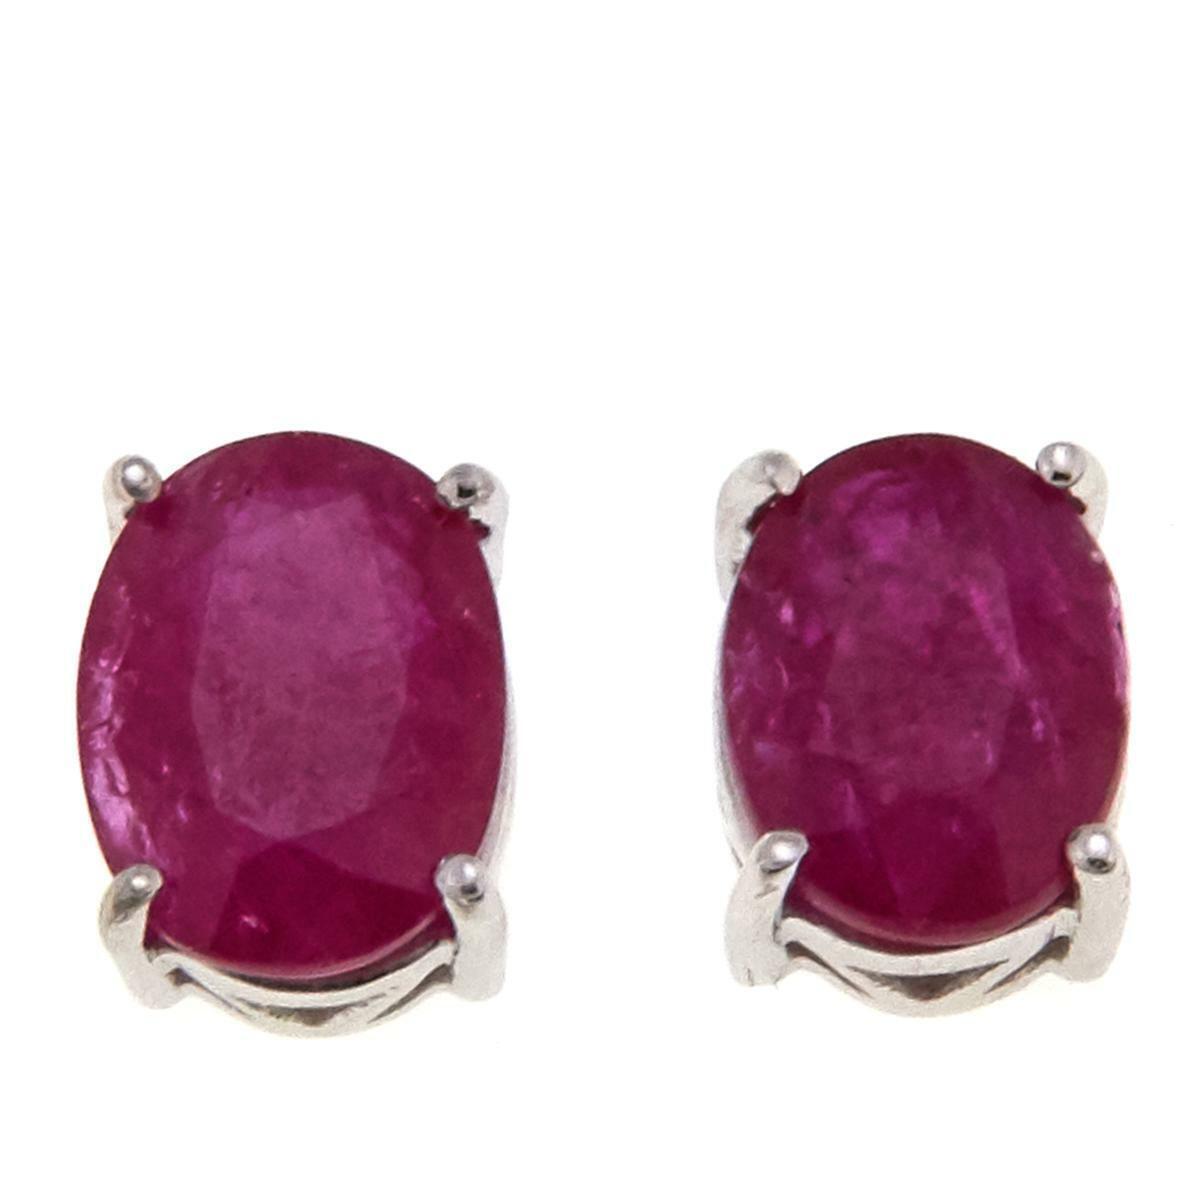 Colleen Lopez "So in Love" 1ctw Red Ruby Sterling Silver Stud Earrings